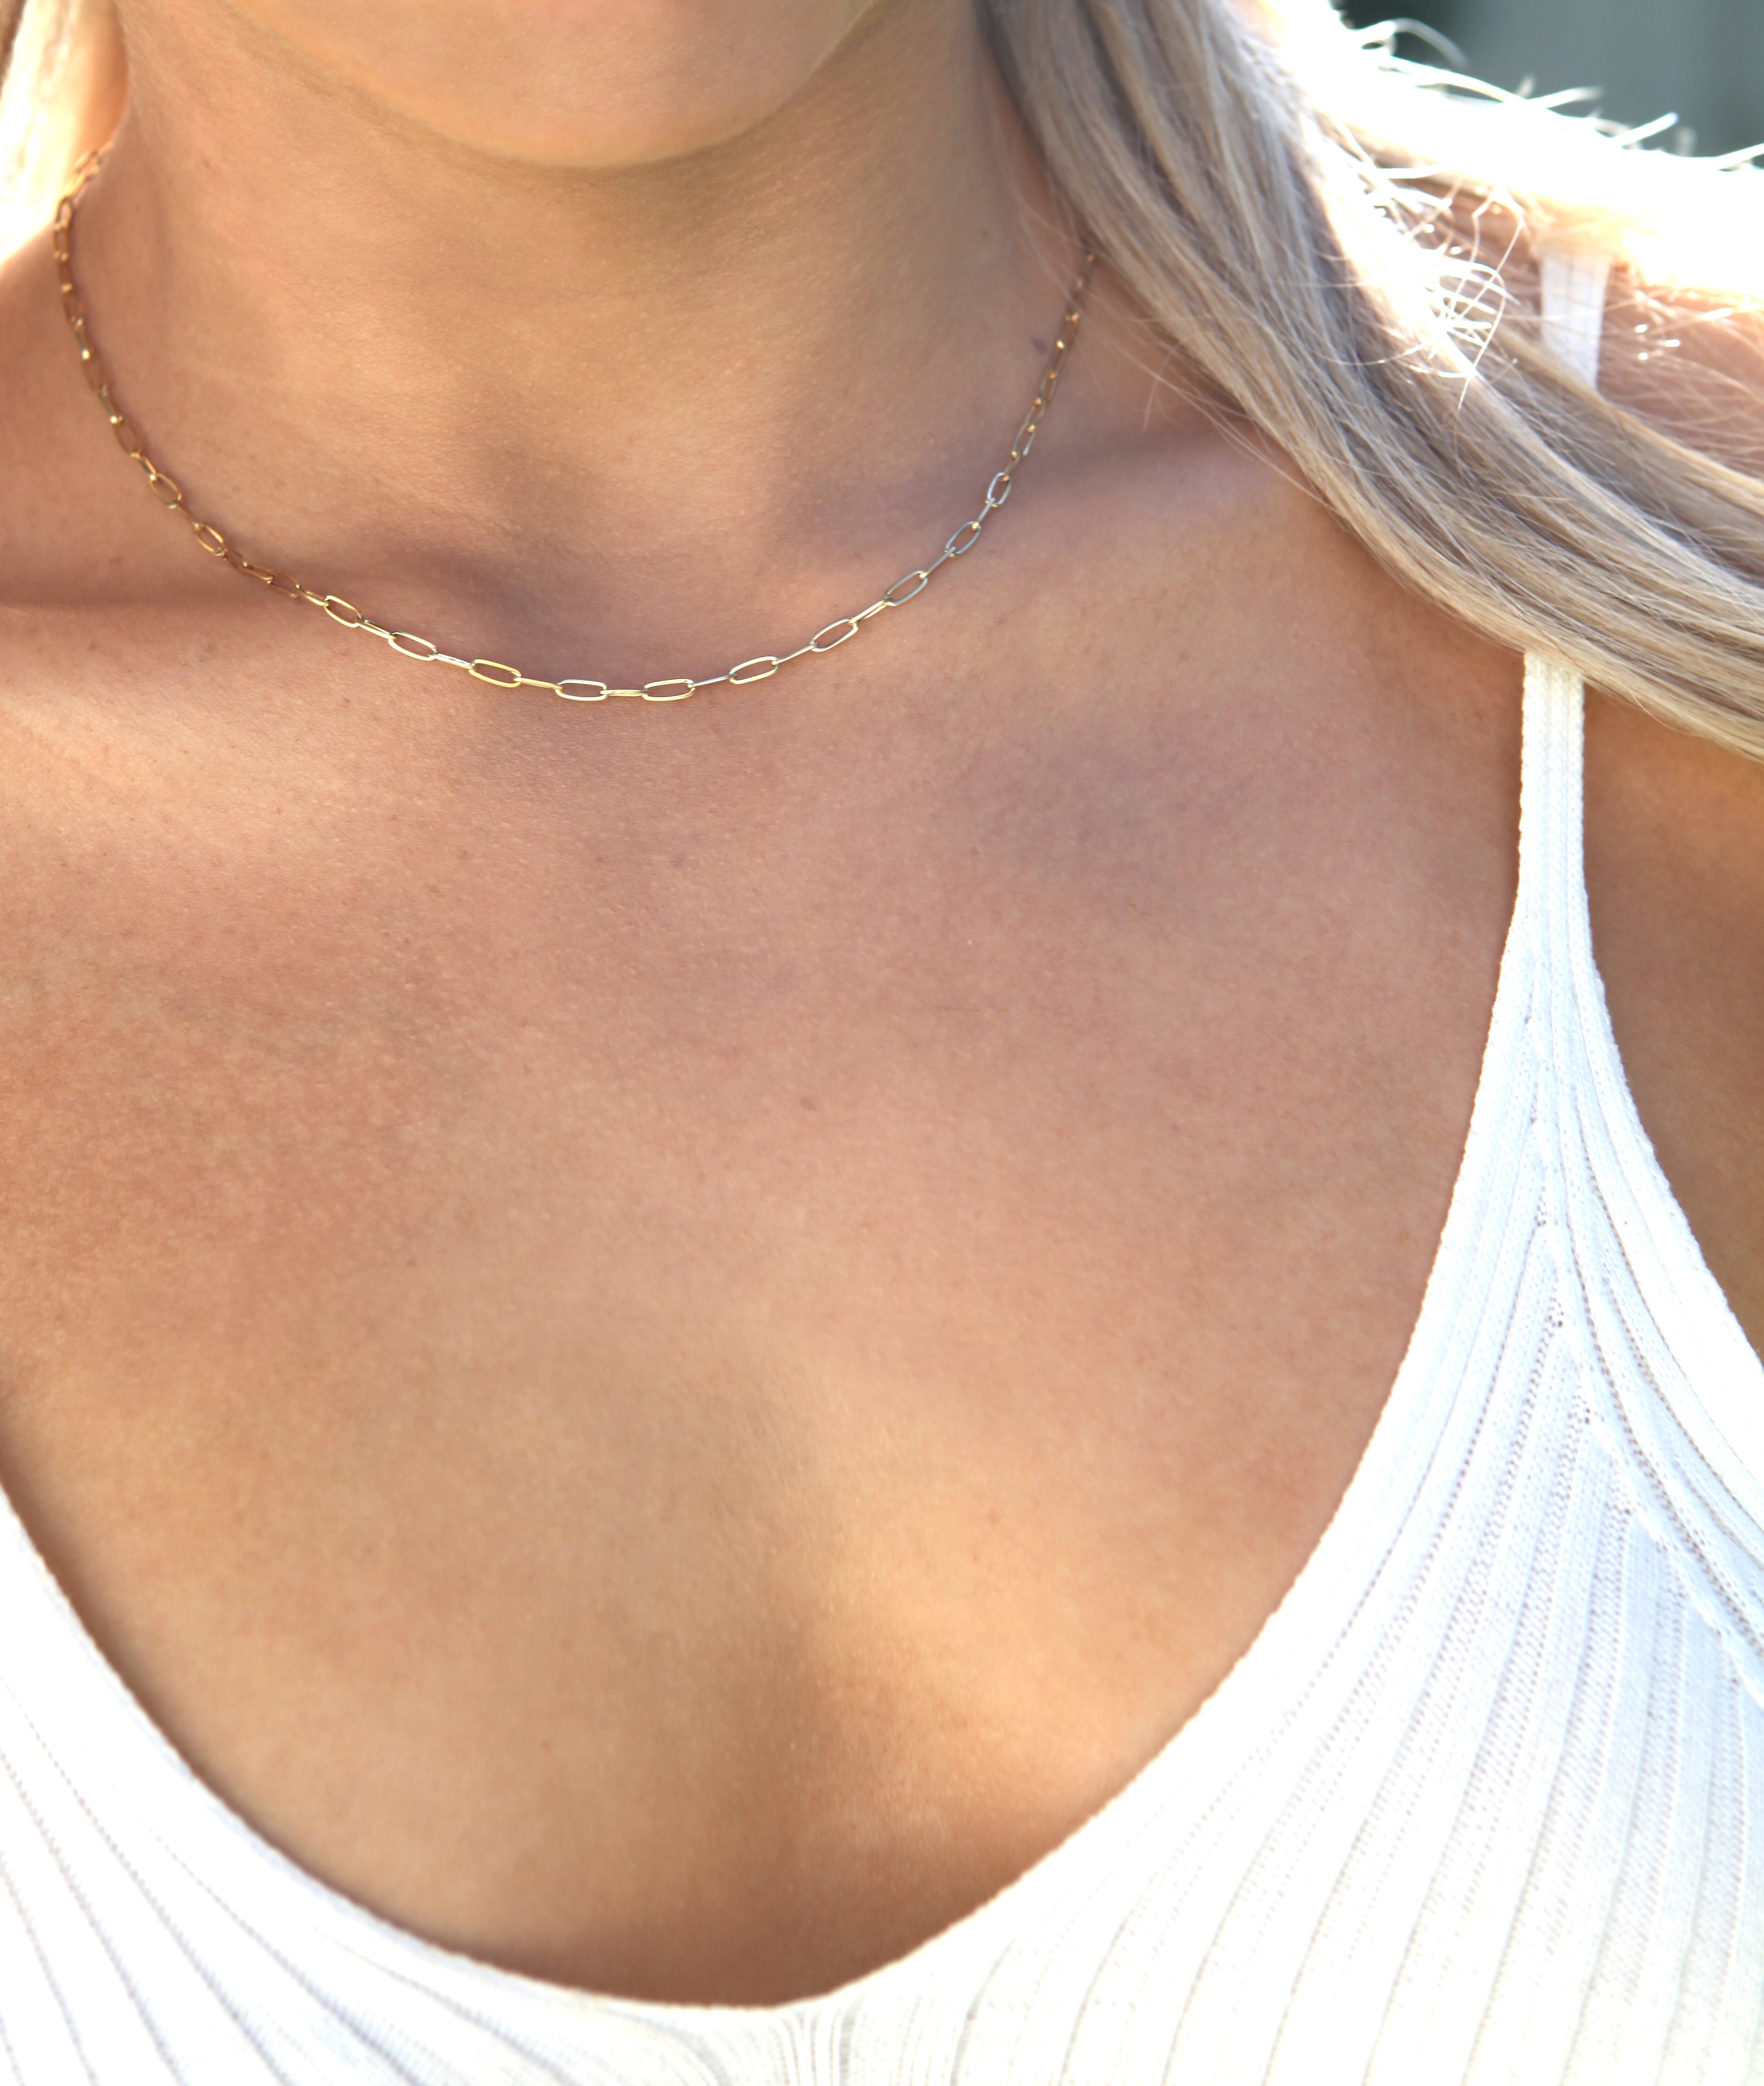 Hailey - 18k Gold Necklace